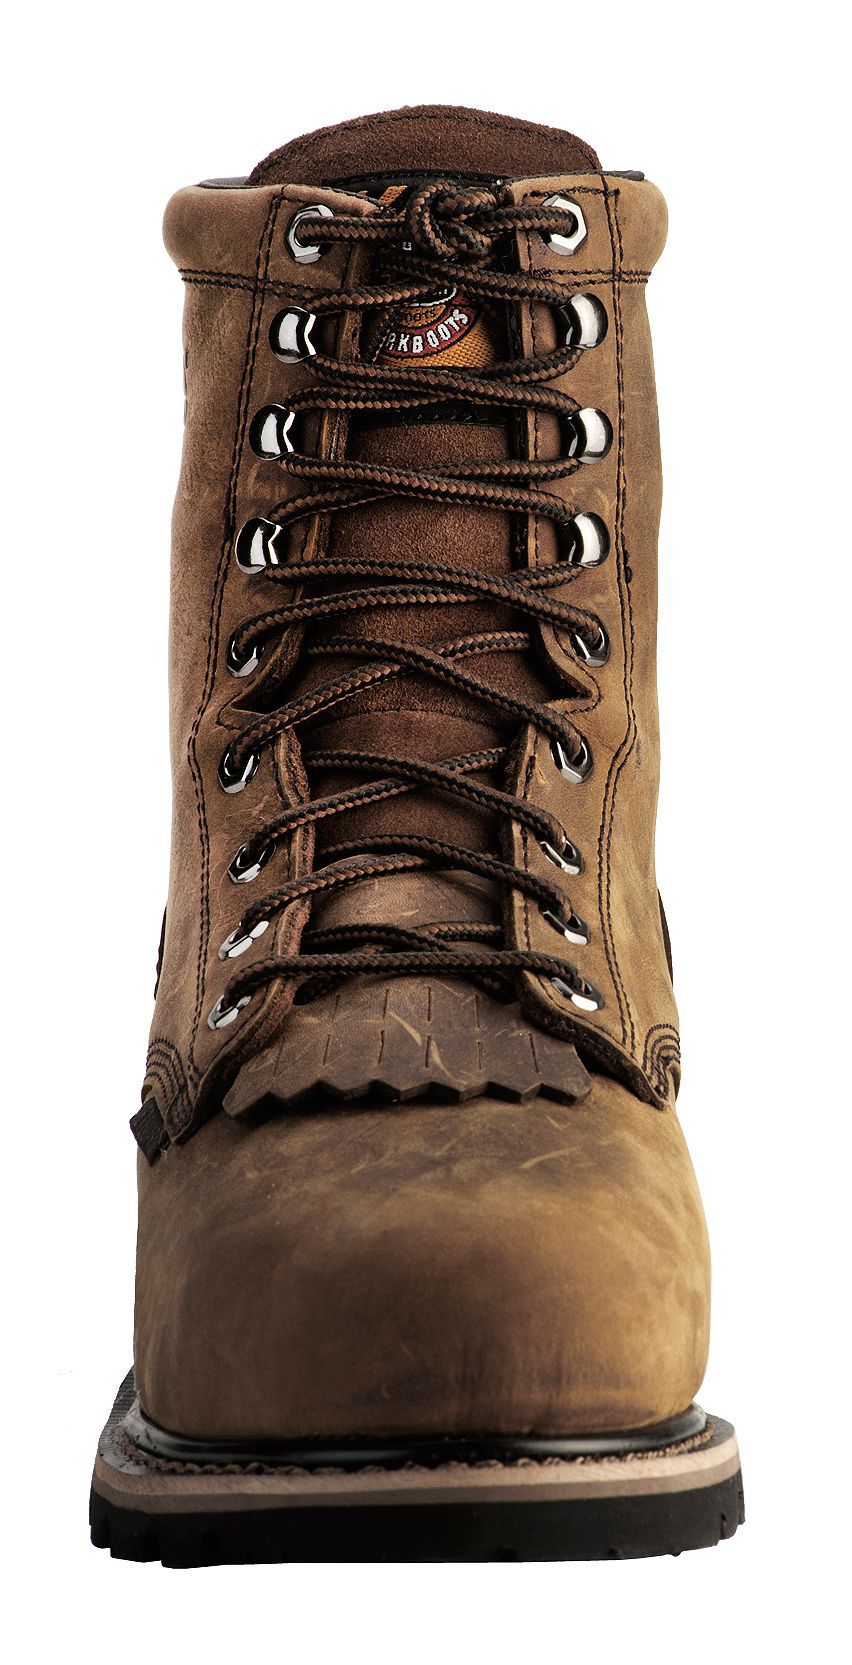 justin lace up composite toe work boots